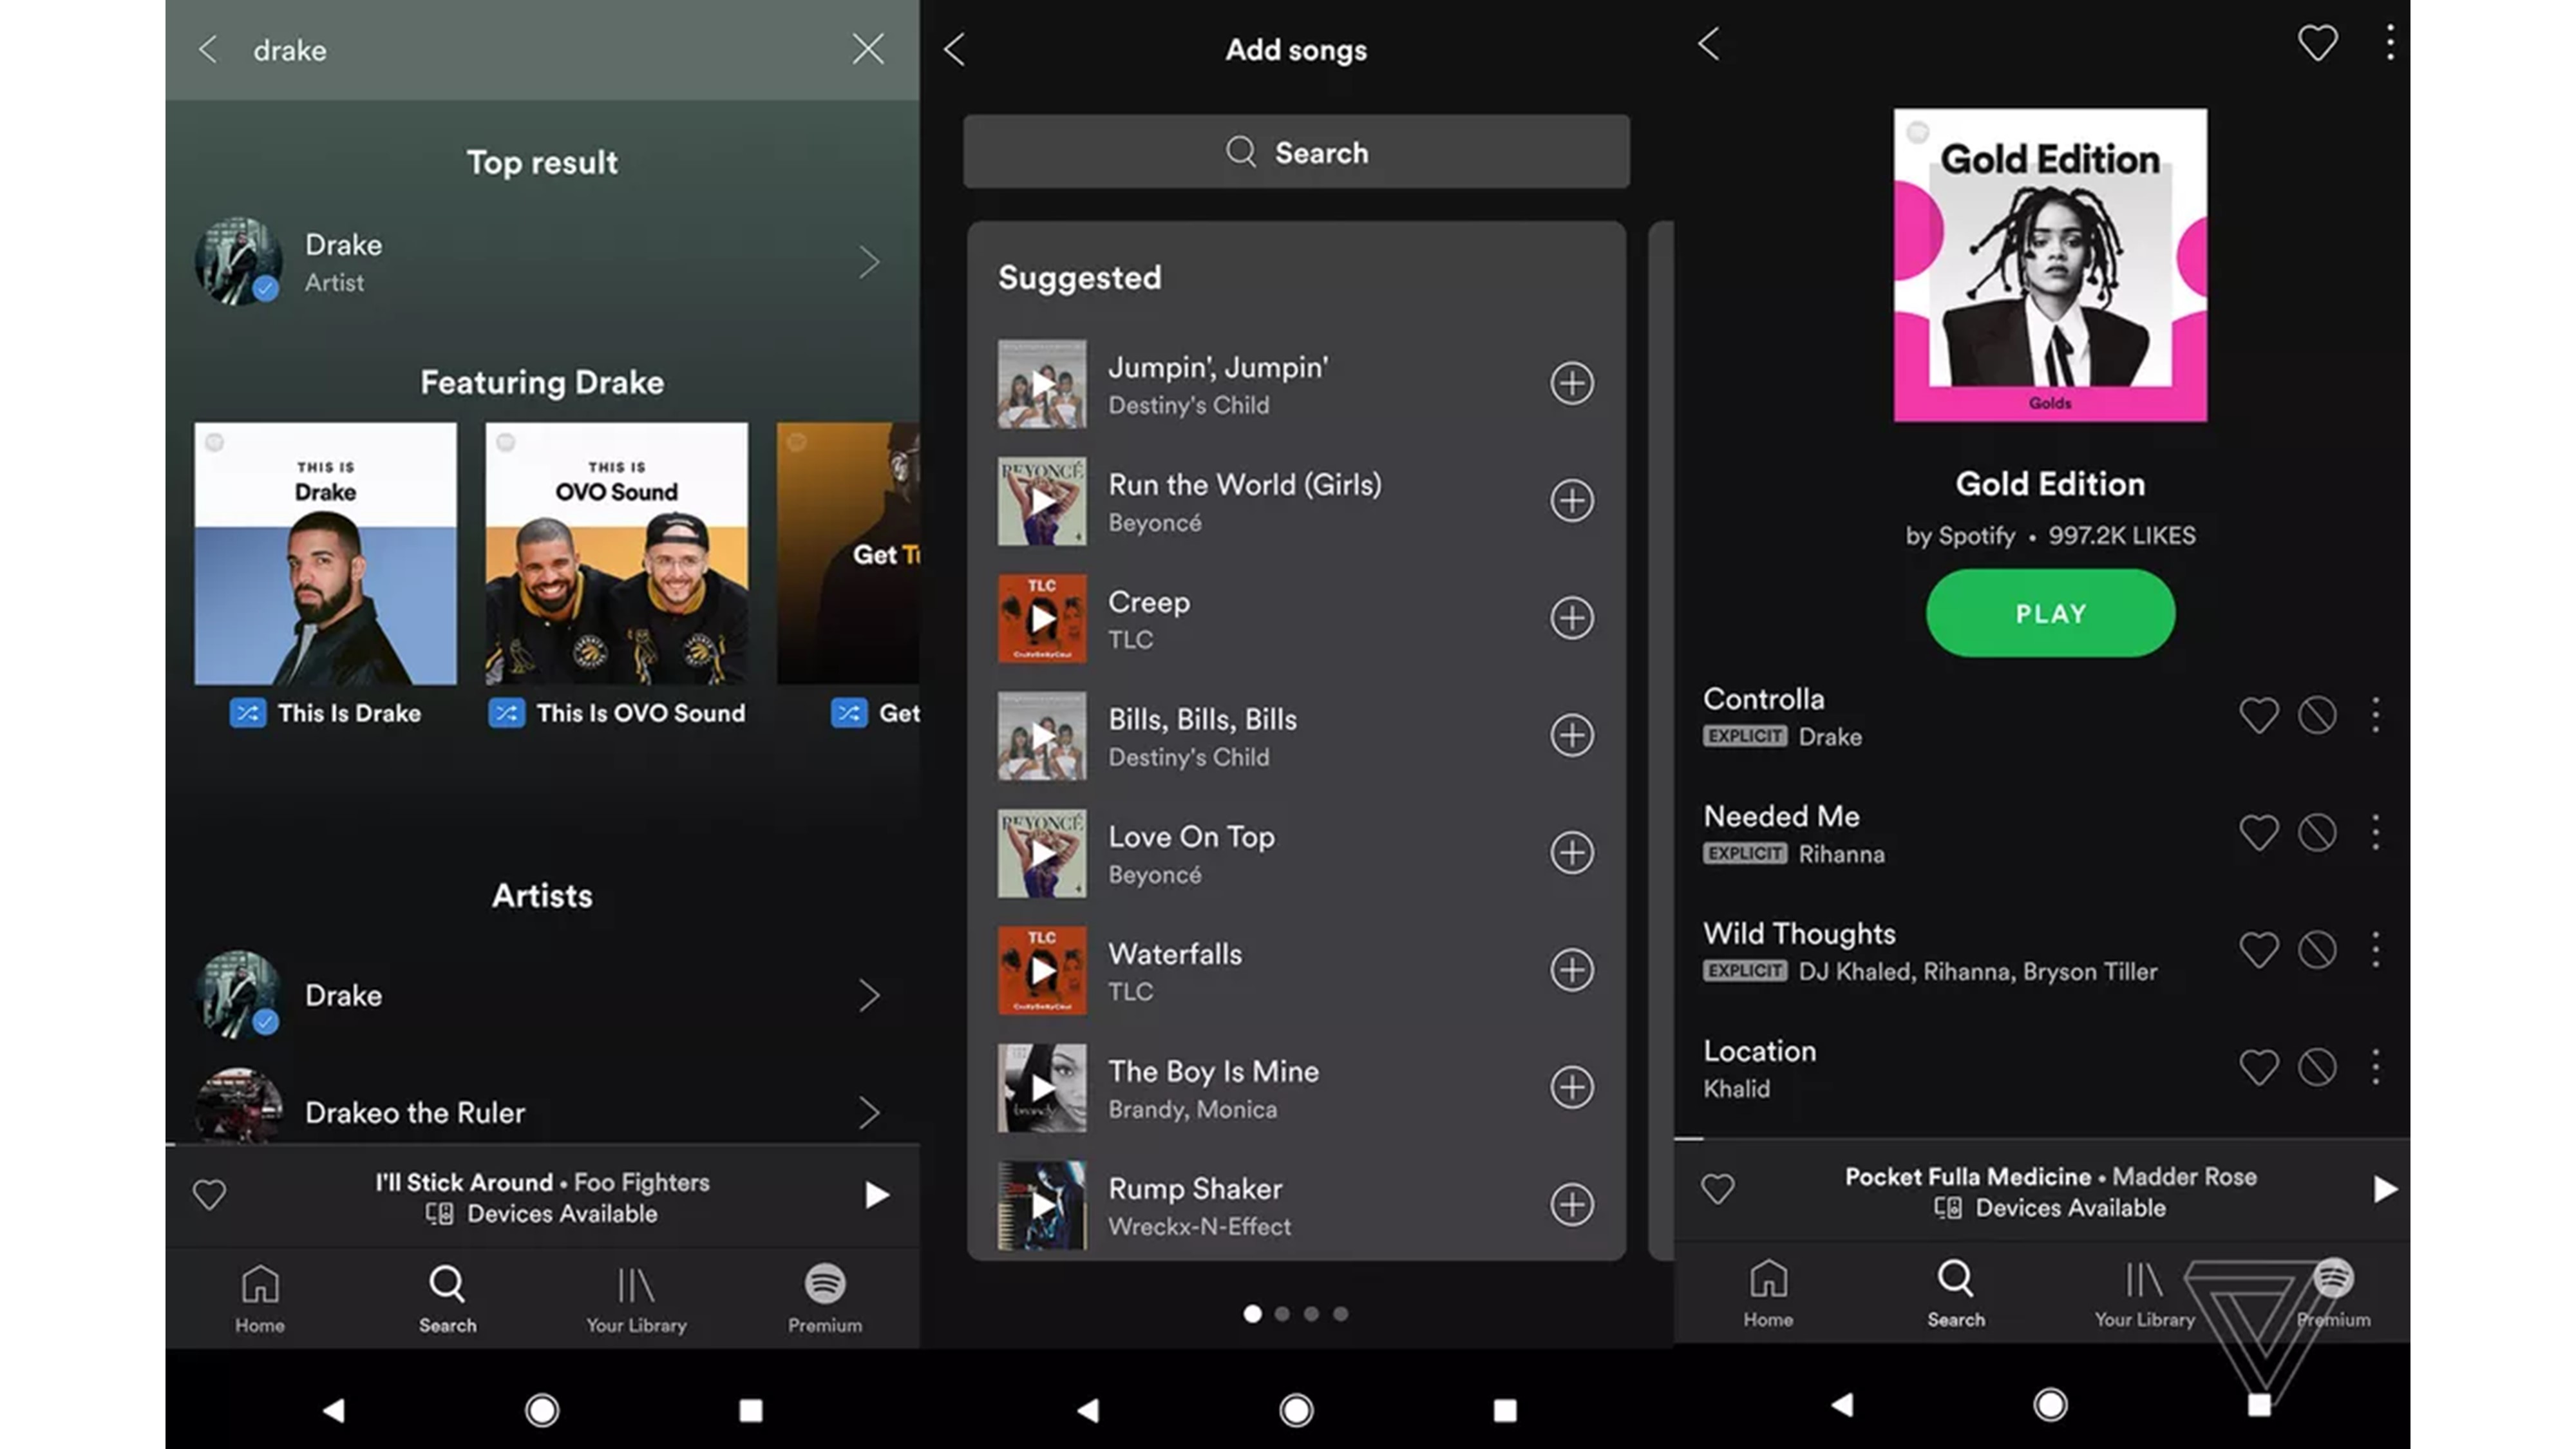 Spotify UI Update Reveal New Features For Free Users